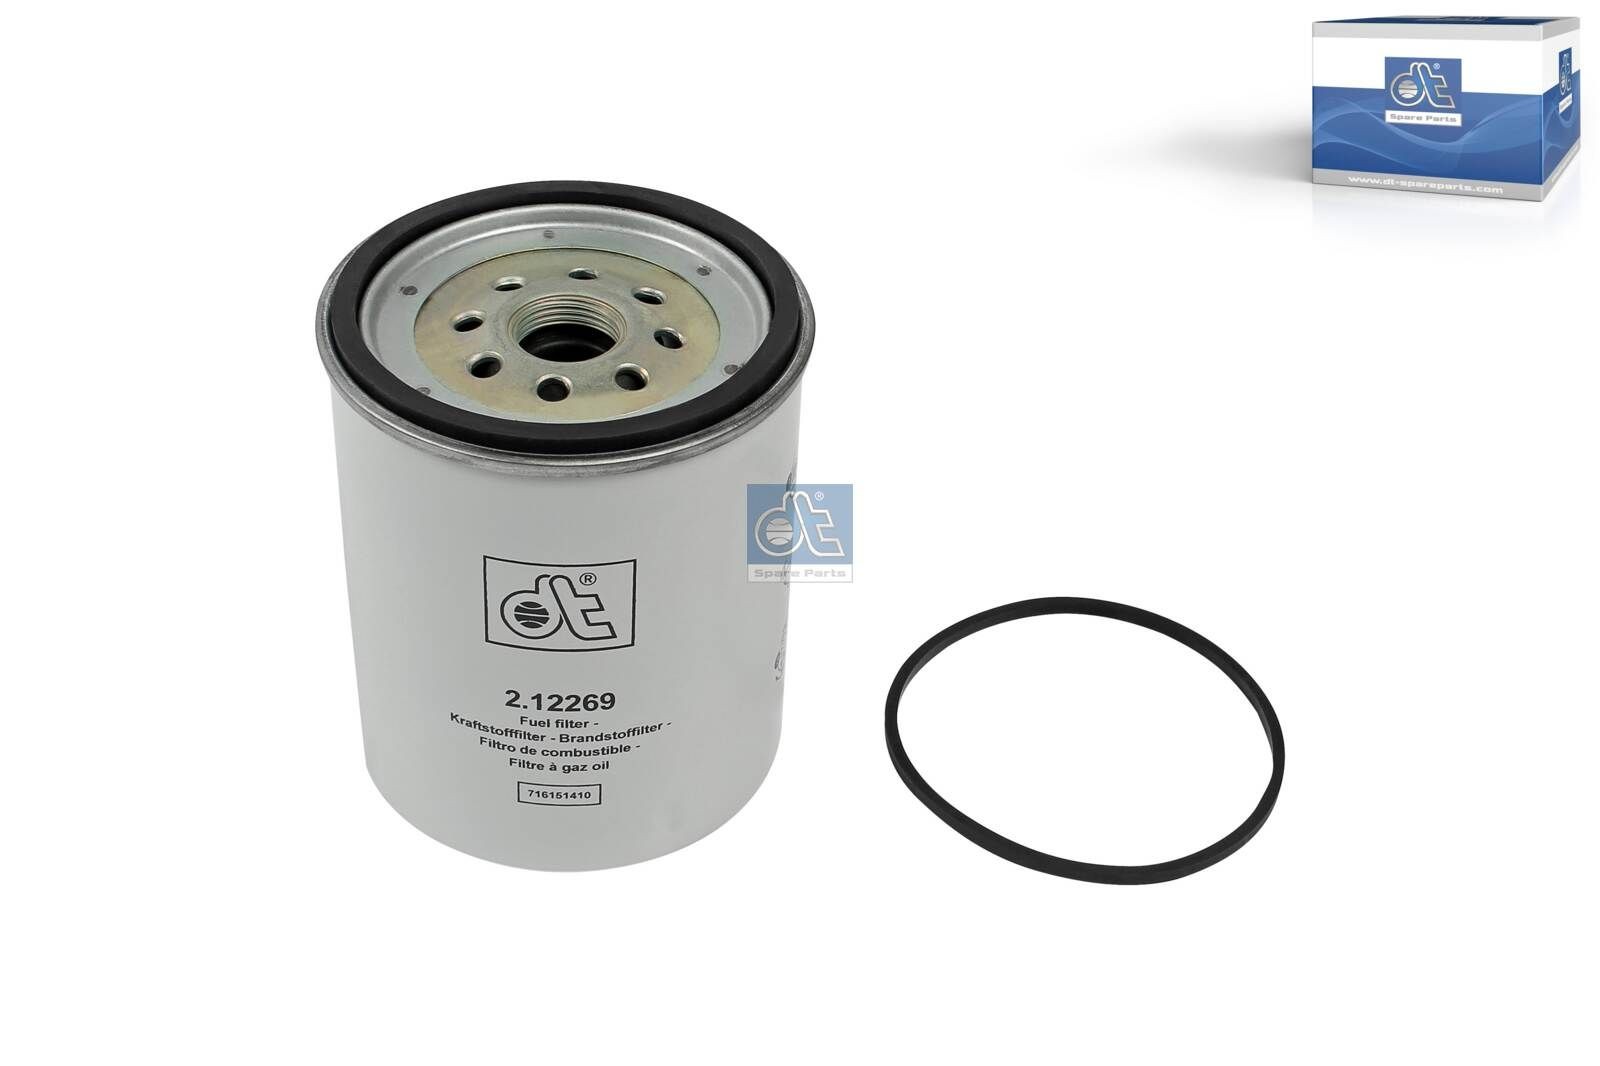 WK 1040/1 x DT Spare Parts 2.12269 Fuel filter 20851191